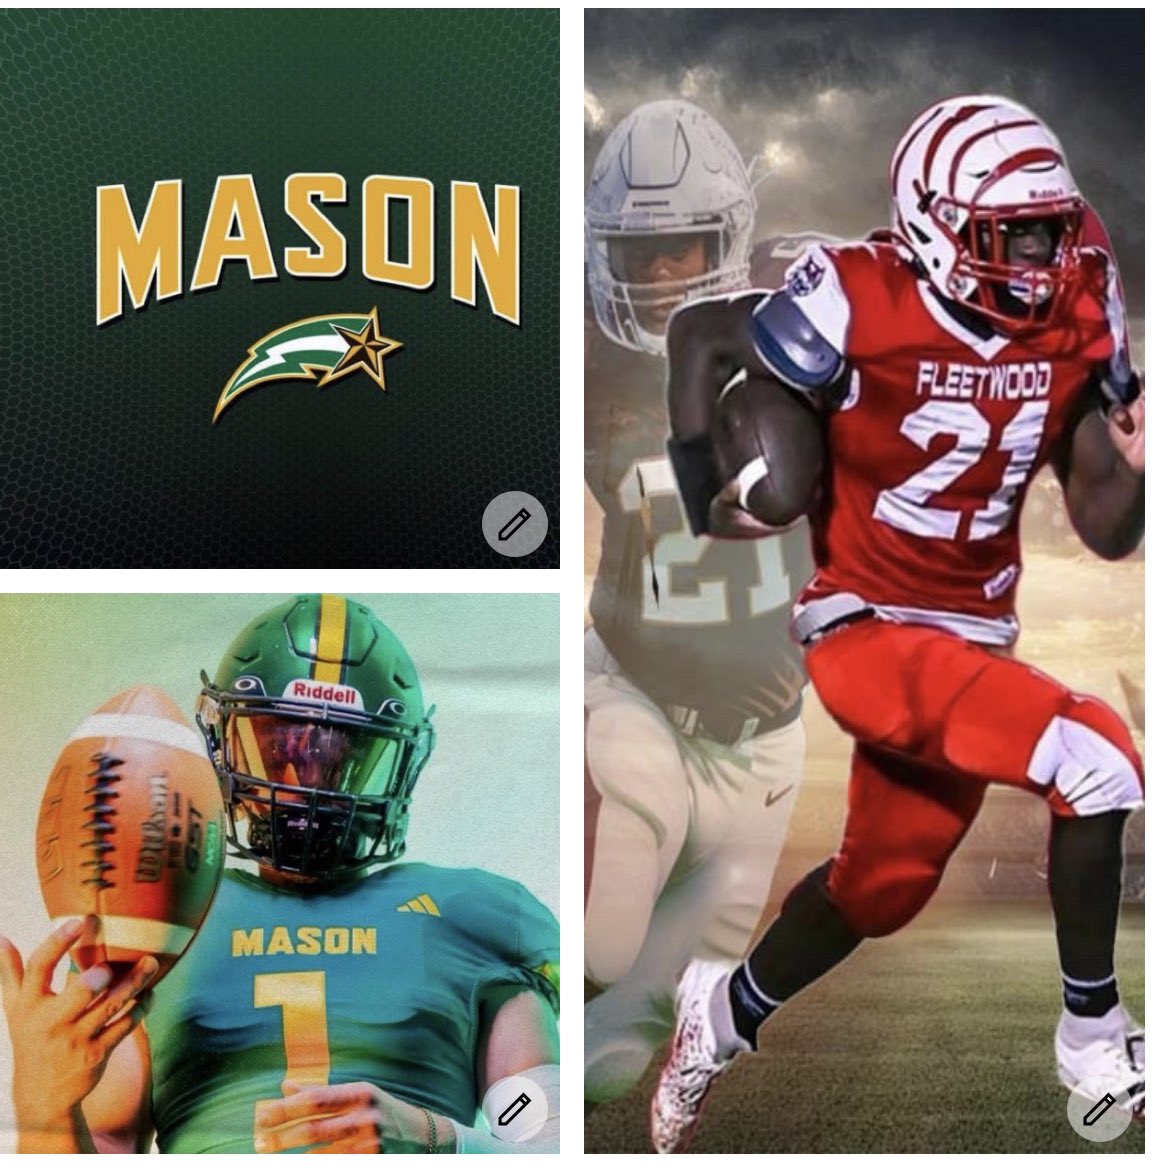 After a amazing call with Coach @CoachO93 I’m bless to have received another Offer from @GeorgeMasonU to play football 🏈 The Underdog #21 ✈️✈️ @fleetwood_hs @coachzeller_ @fwoodsuperfans @Coach_spit